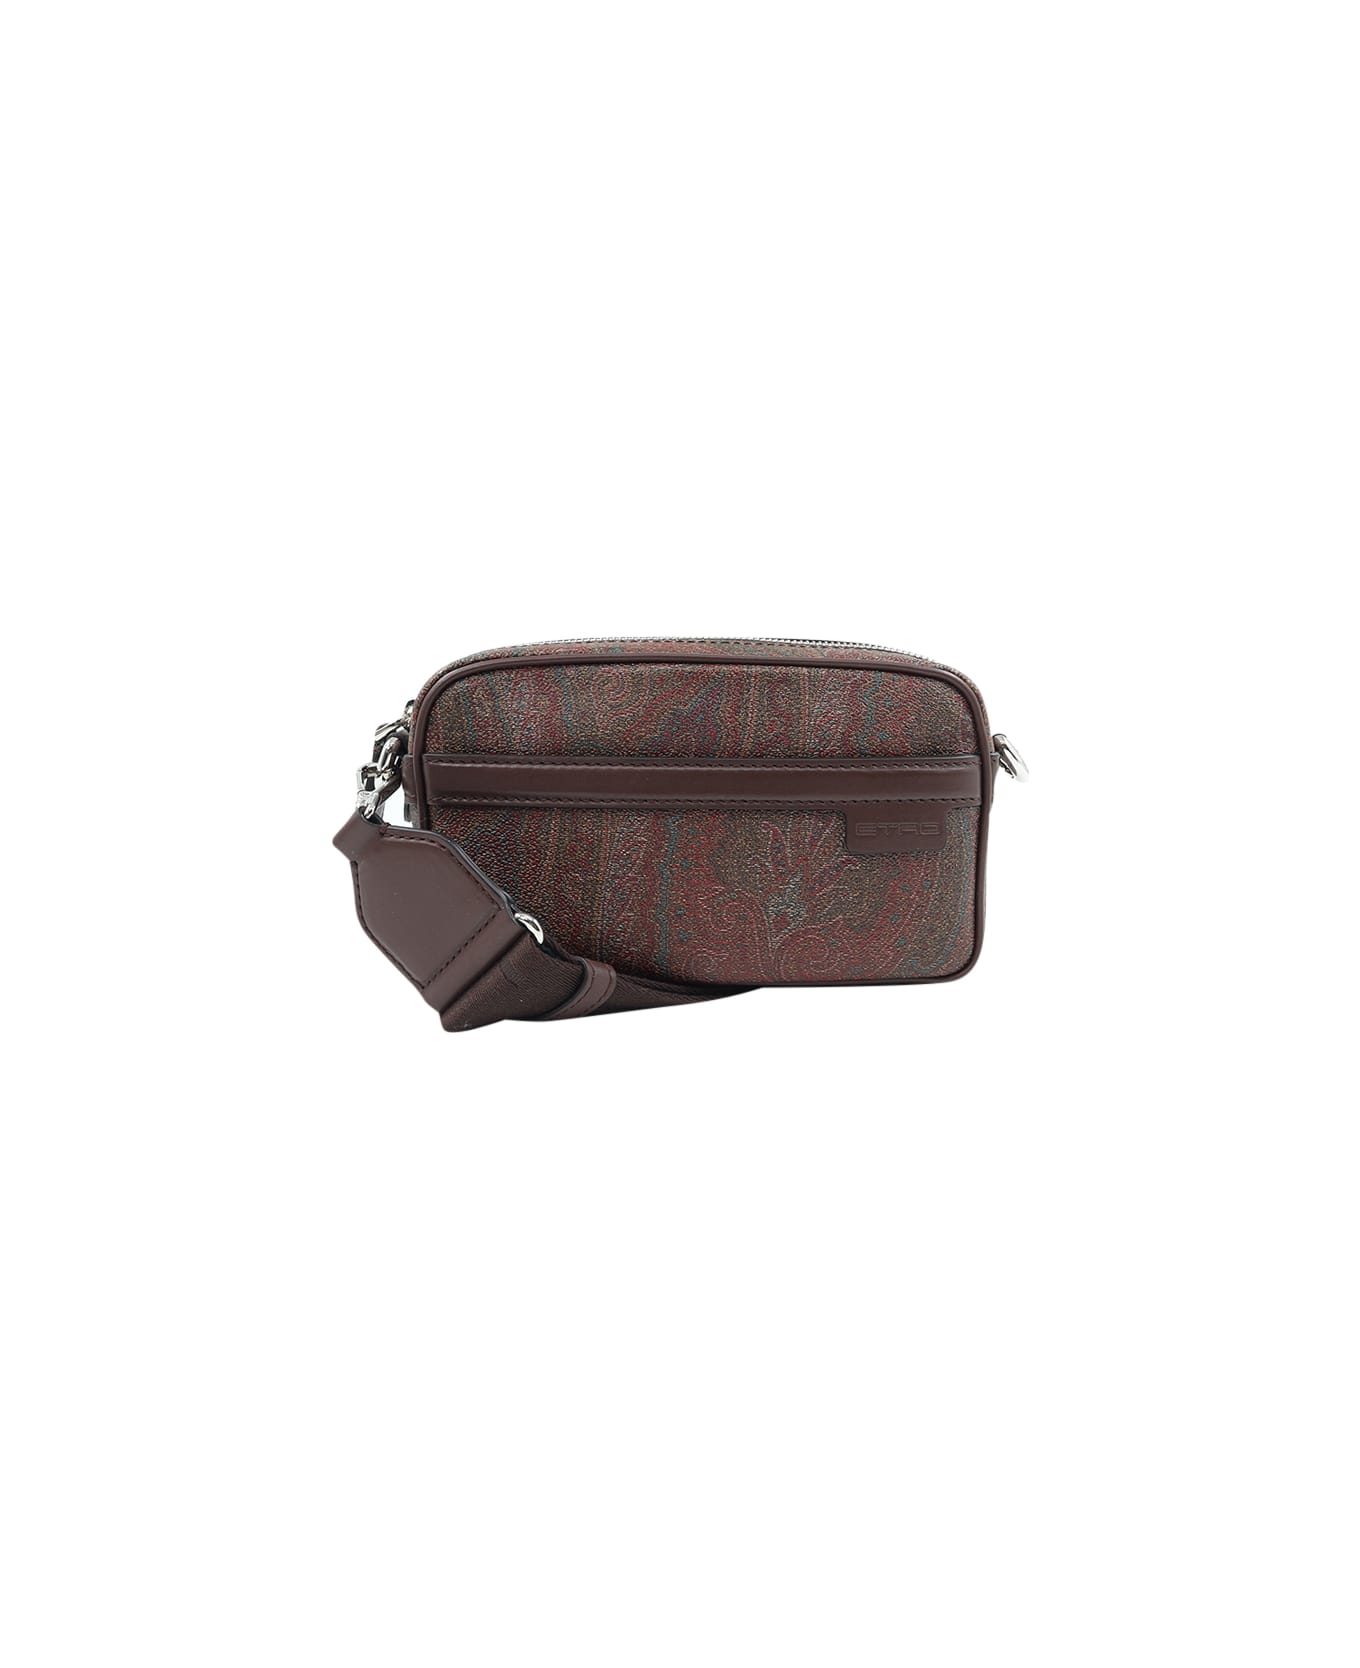 Etro Paisley Mini Bag In Coated Canvas - Brown ショルダーバッグ